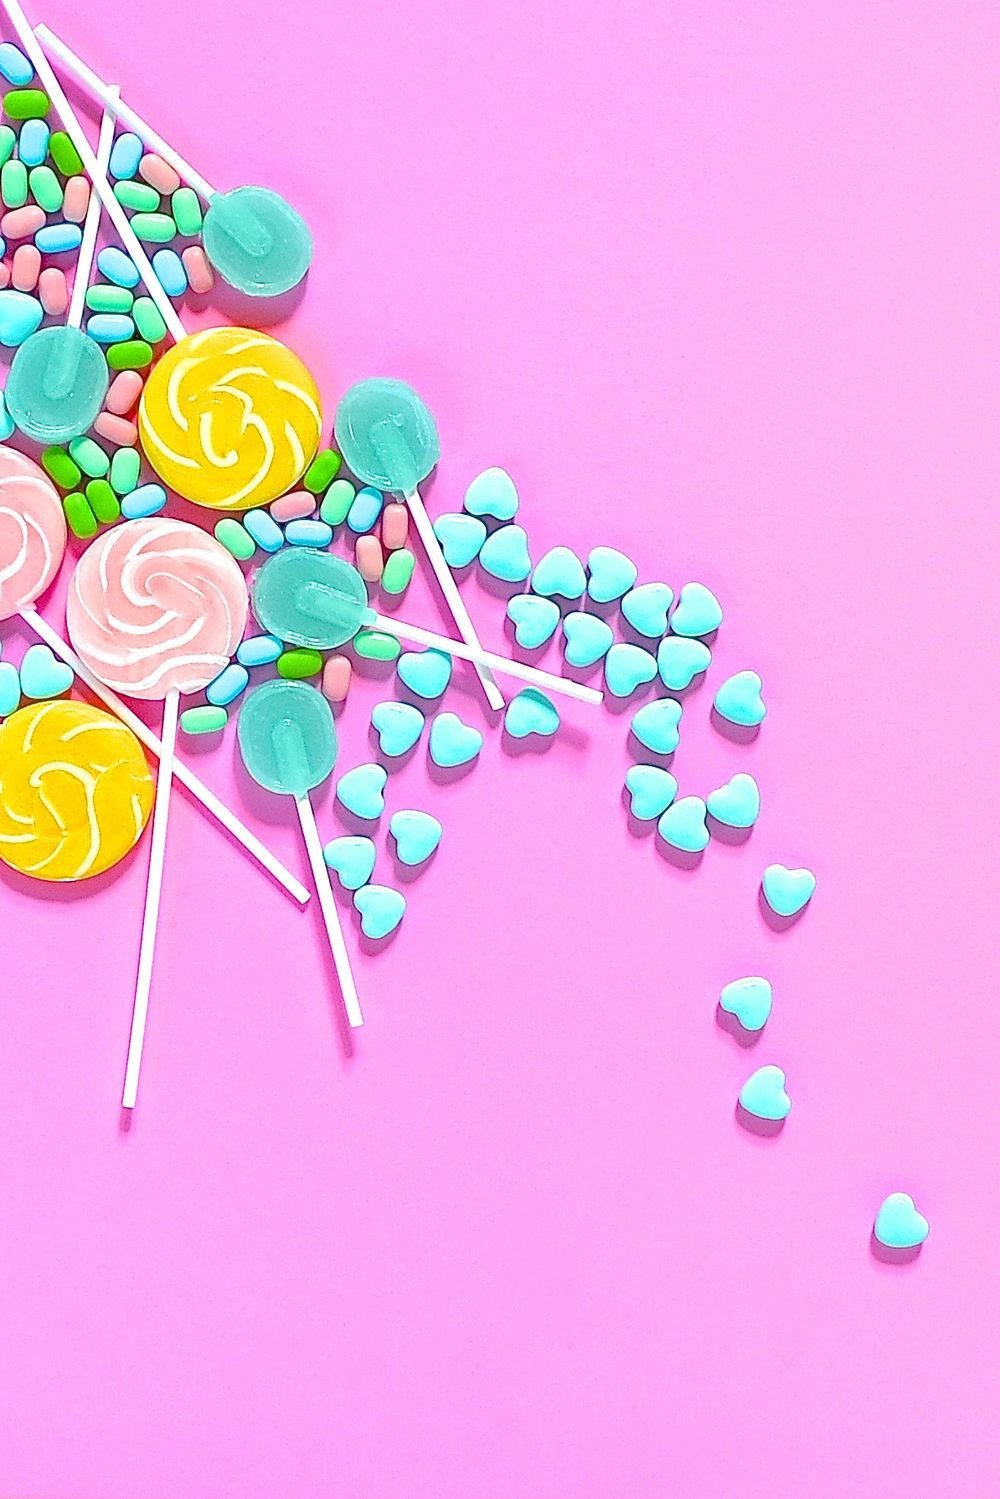 Download Pastel Aesthetic Candies Background Wallpaper